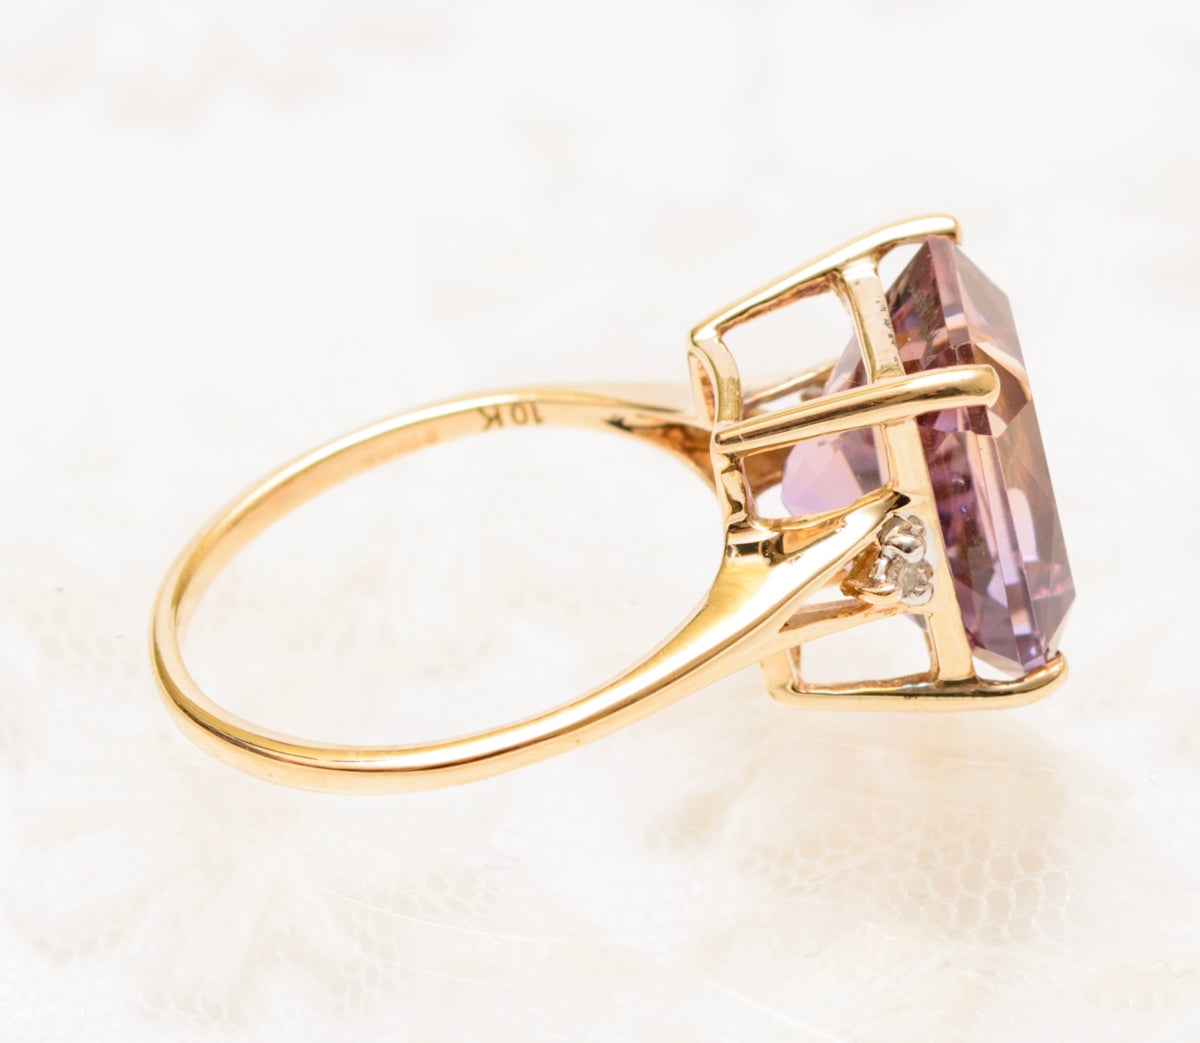 9ct Gold & Natural 6.5 Carat Ametrine Gemstone Ring With Diamond Accents (A1830)